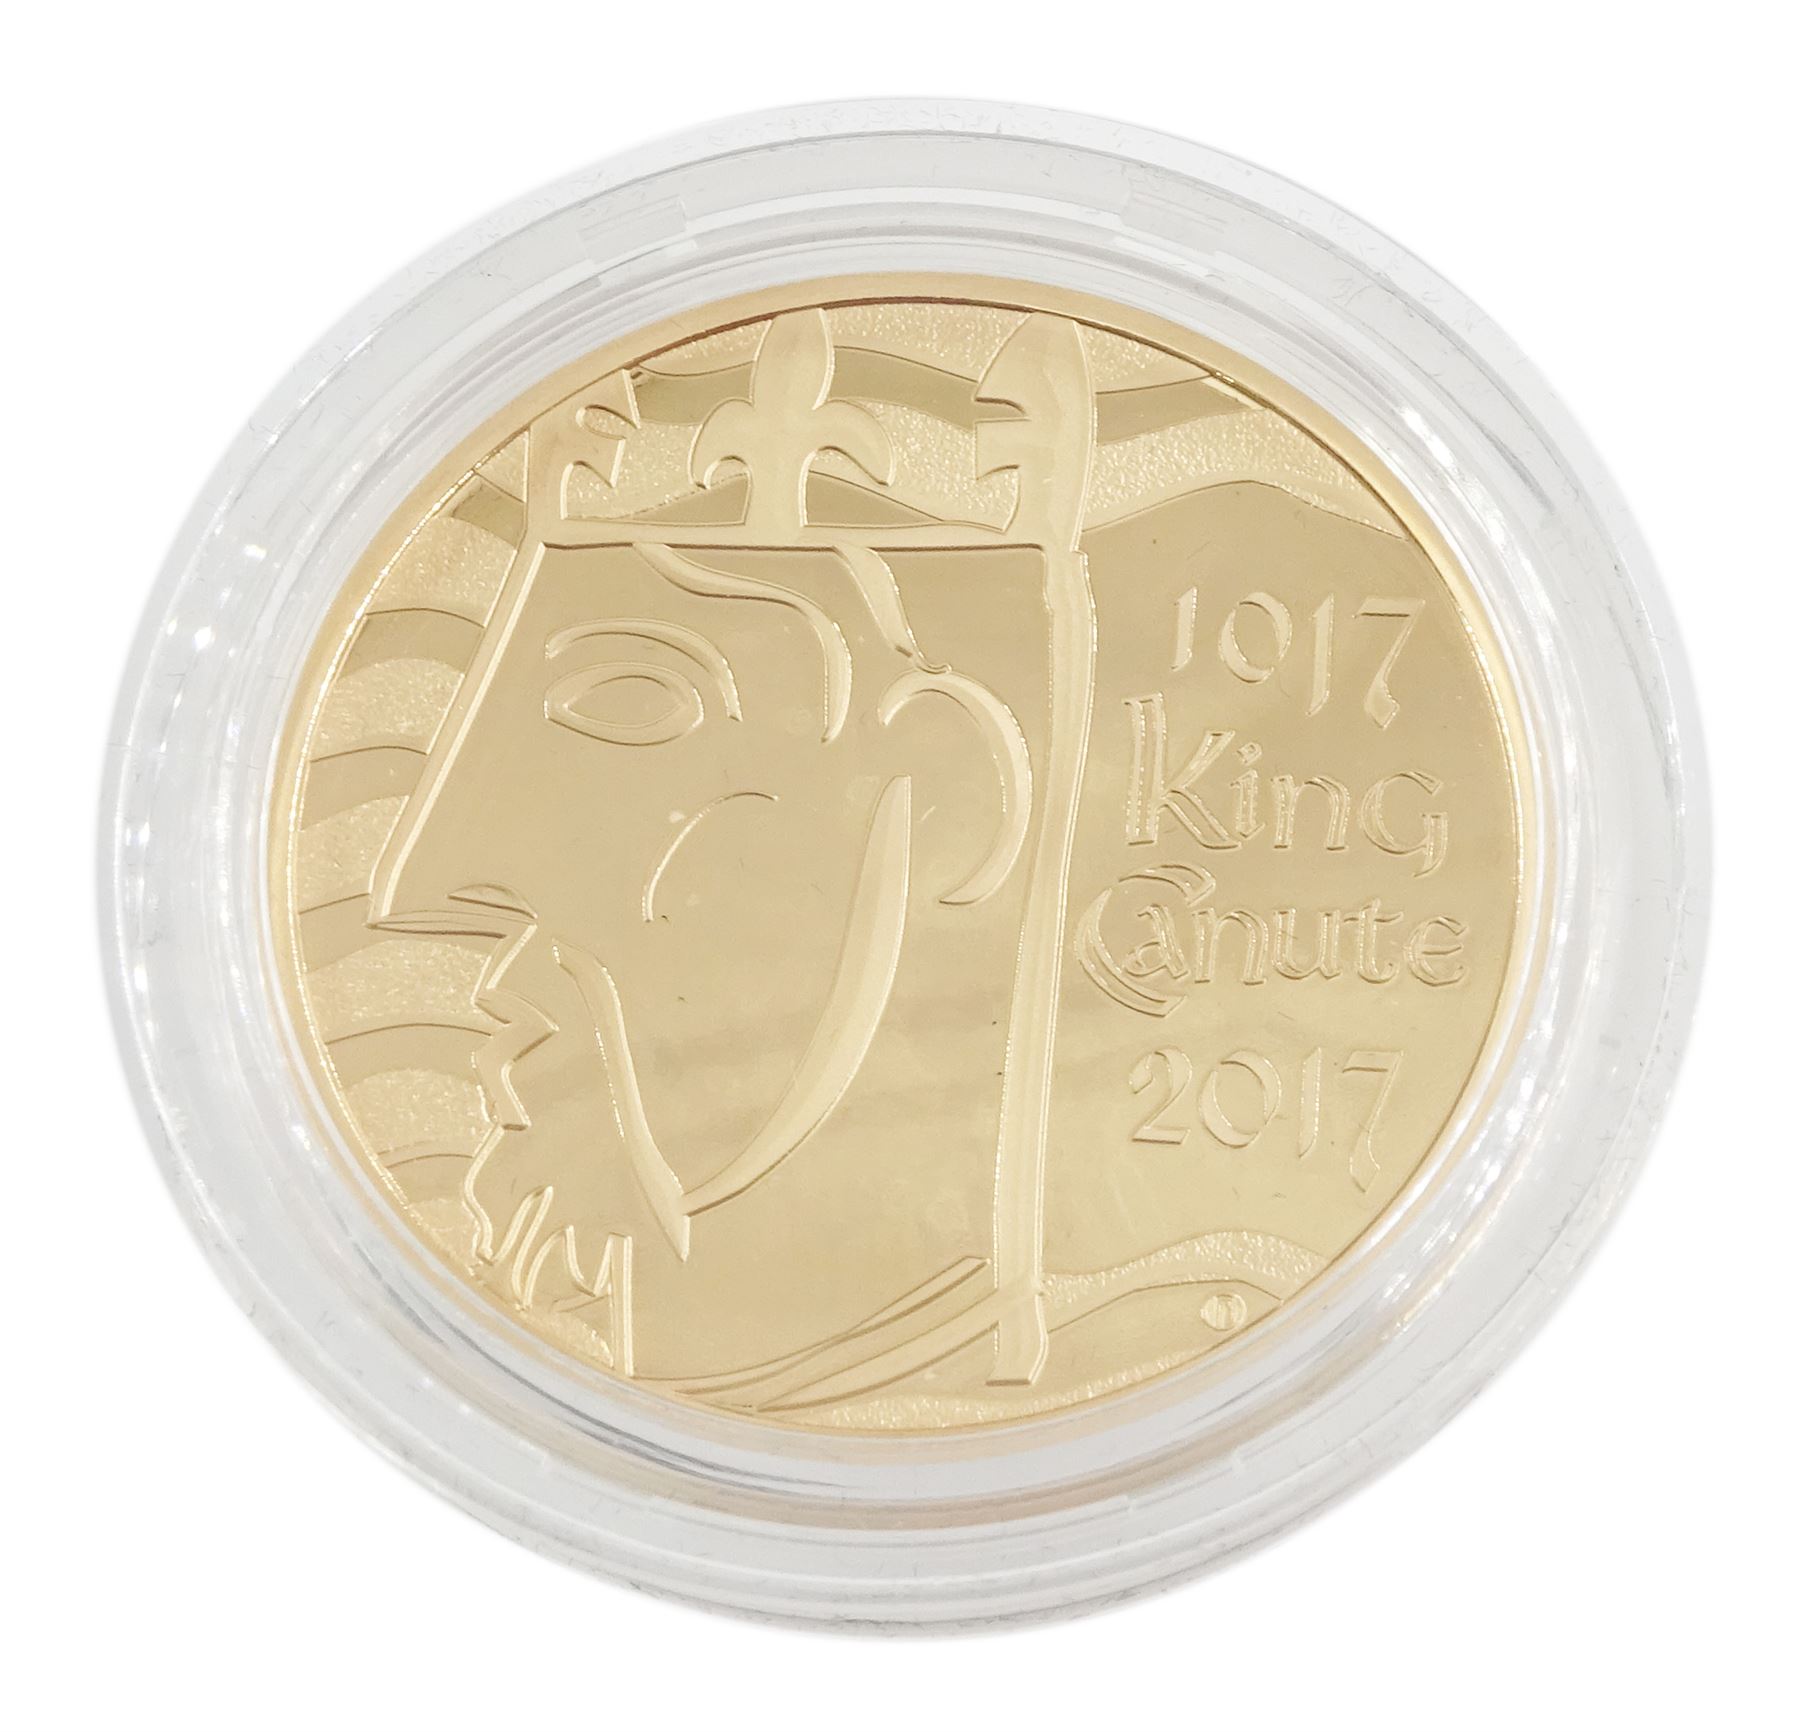 Queen Elizabeth II 2017 gold proof five pound coin commemorating 'The 1000th Anniversary of the Coro - Image 2 of 3